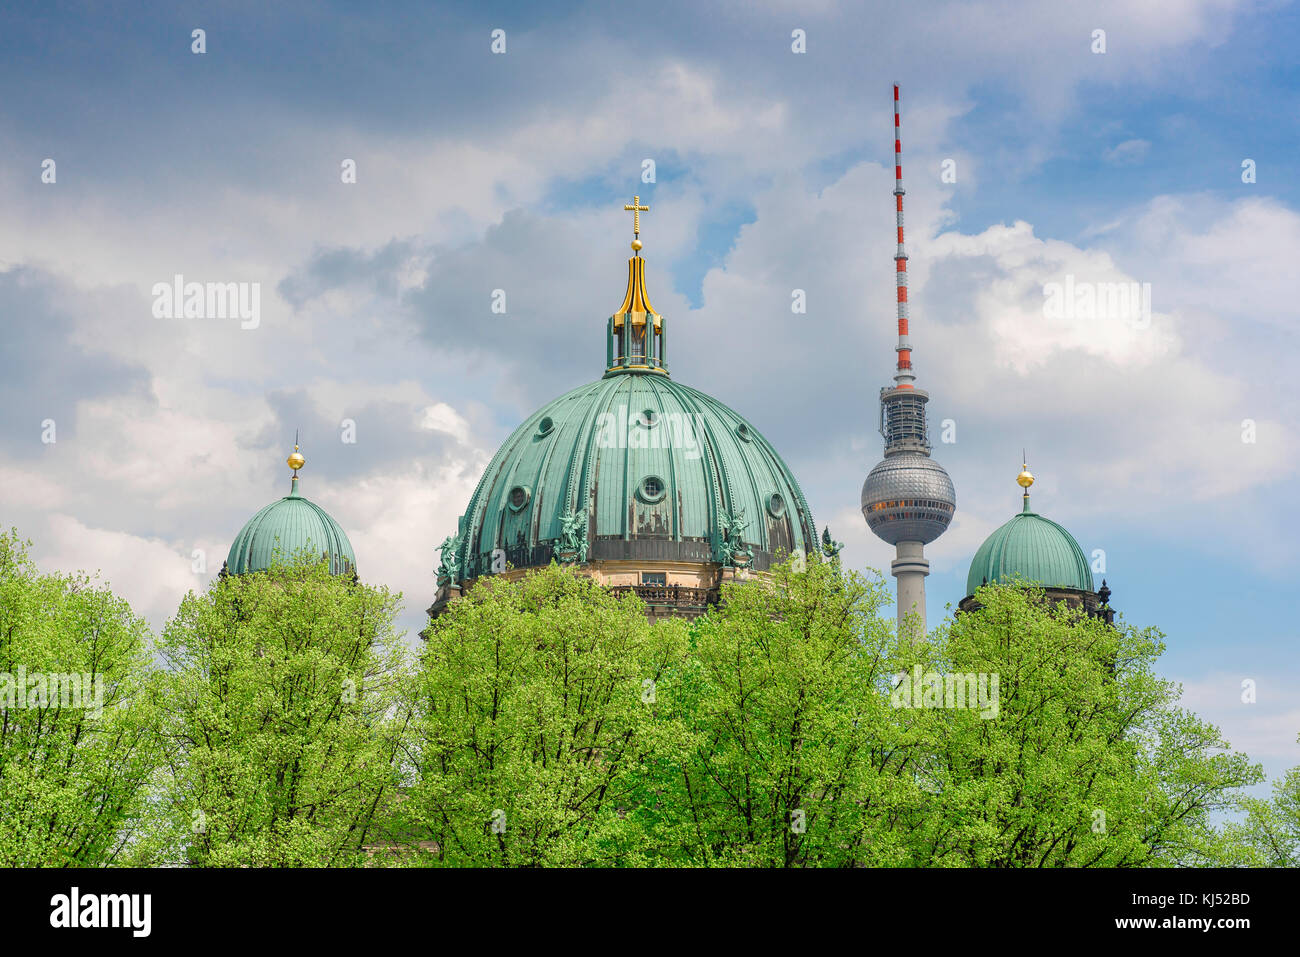 Berlin skyline, a view of contrasting images of the trees of the Lustgarten,the Berliner Dom and the Fernsehturm TV tower, Germany. Stock Photo